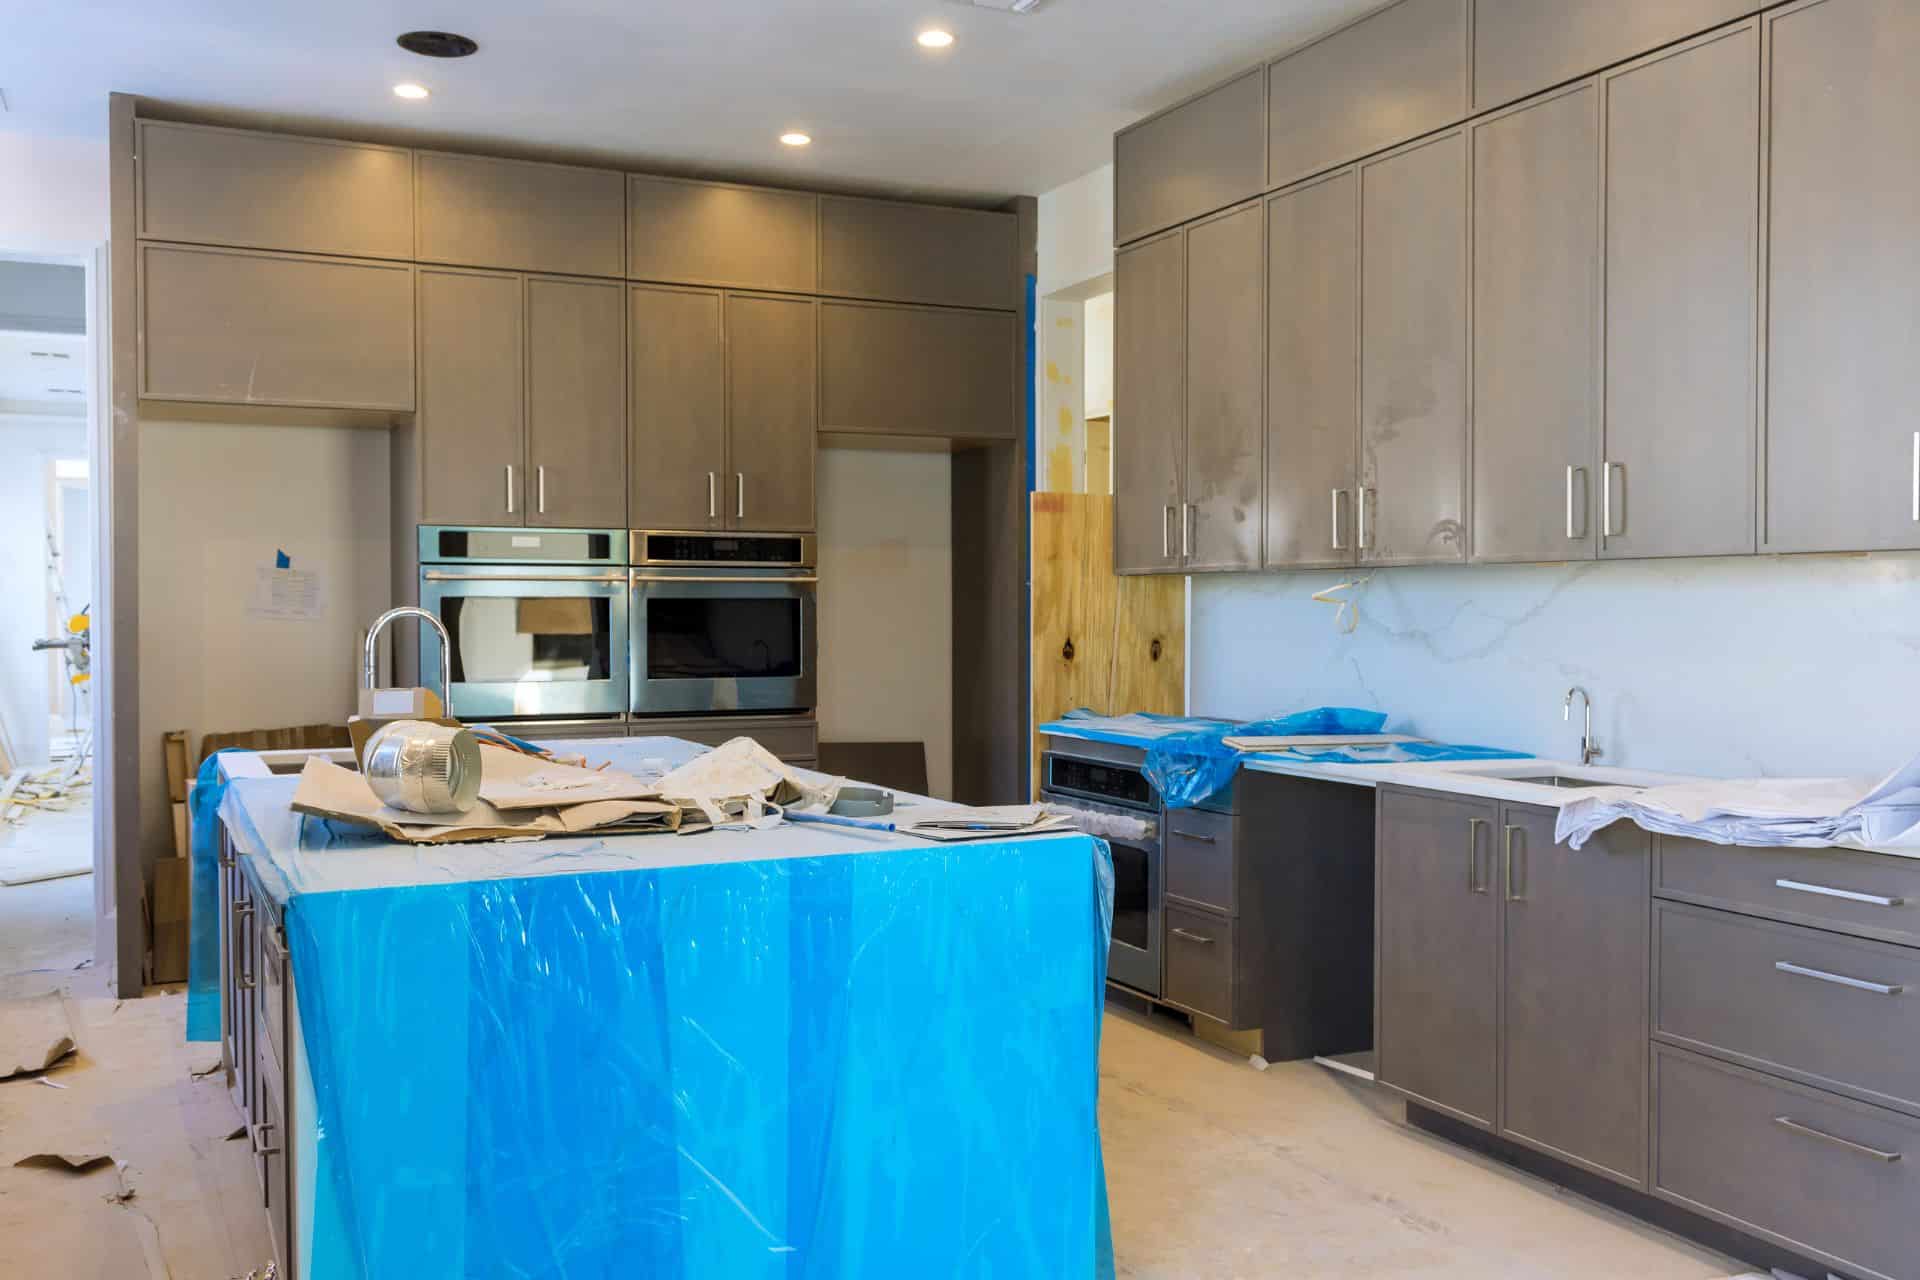 A mid-range kitchen remodel with a $50,000 budget includes semi-custom cabinets, quality countertops, upgraded appliances, hardwood or tile flooring, advanced lighting, designer paint and backsplash, and covers professional labor and additional expenses.